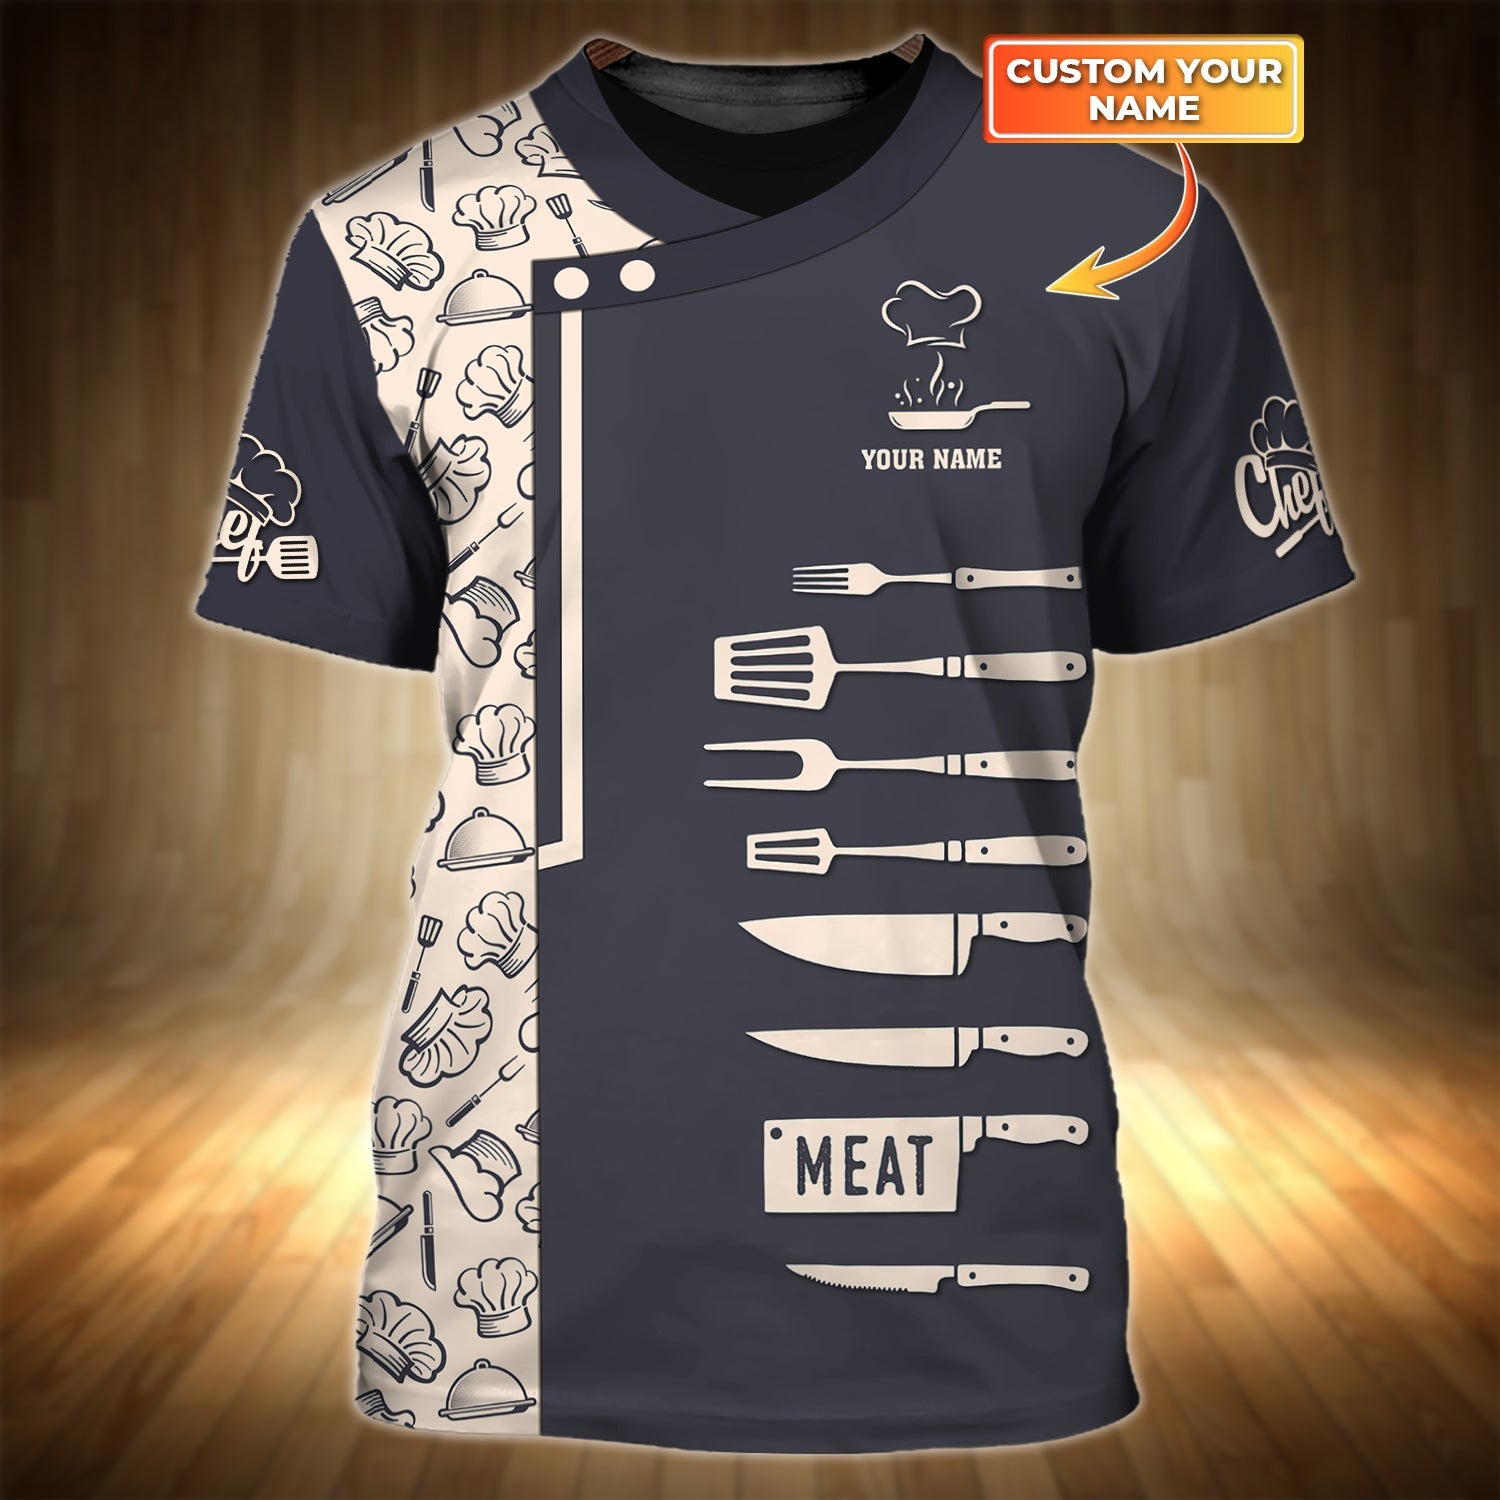 Chef Pattern Shirt Chef Knives Personalized Name 3D Tshirt Gift For Cooks Restaurant Uniform